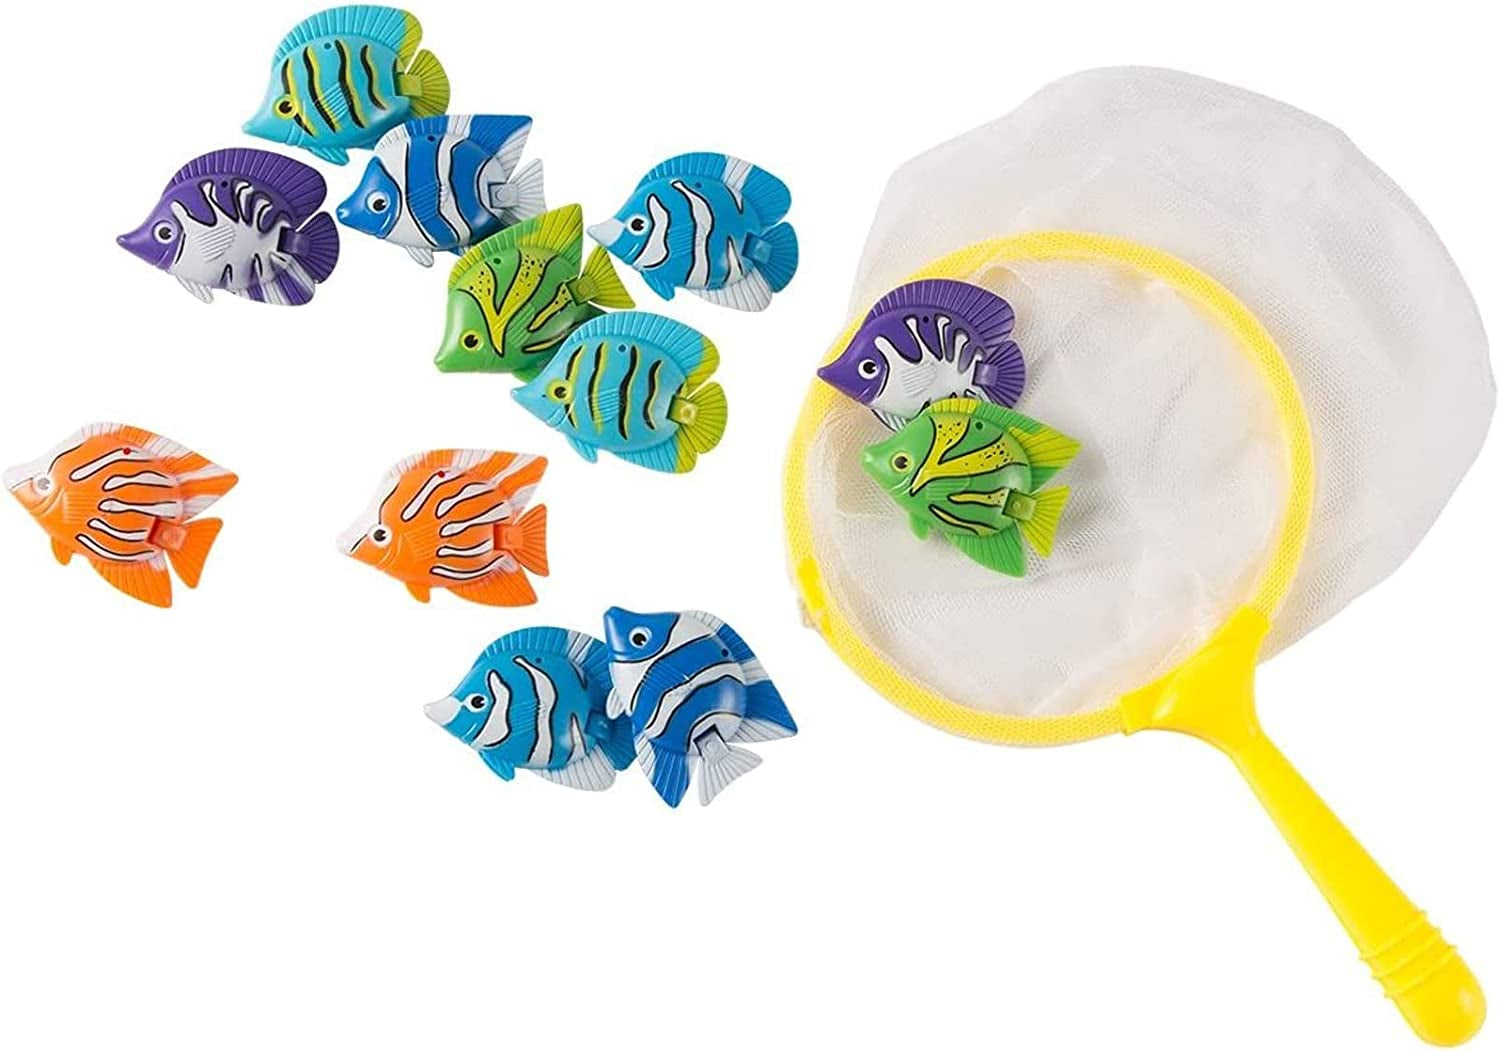 BLUE PANDA Swim Dive Toys, Kid Pool Games, 12 Fish Rings for Diving with Net (13 Pieces)